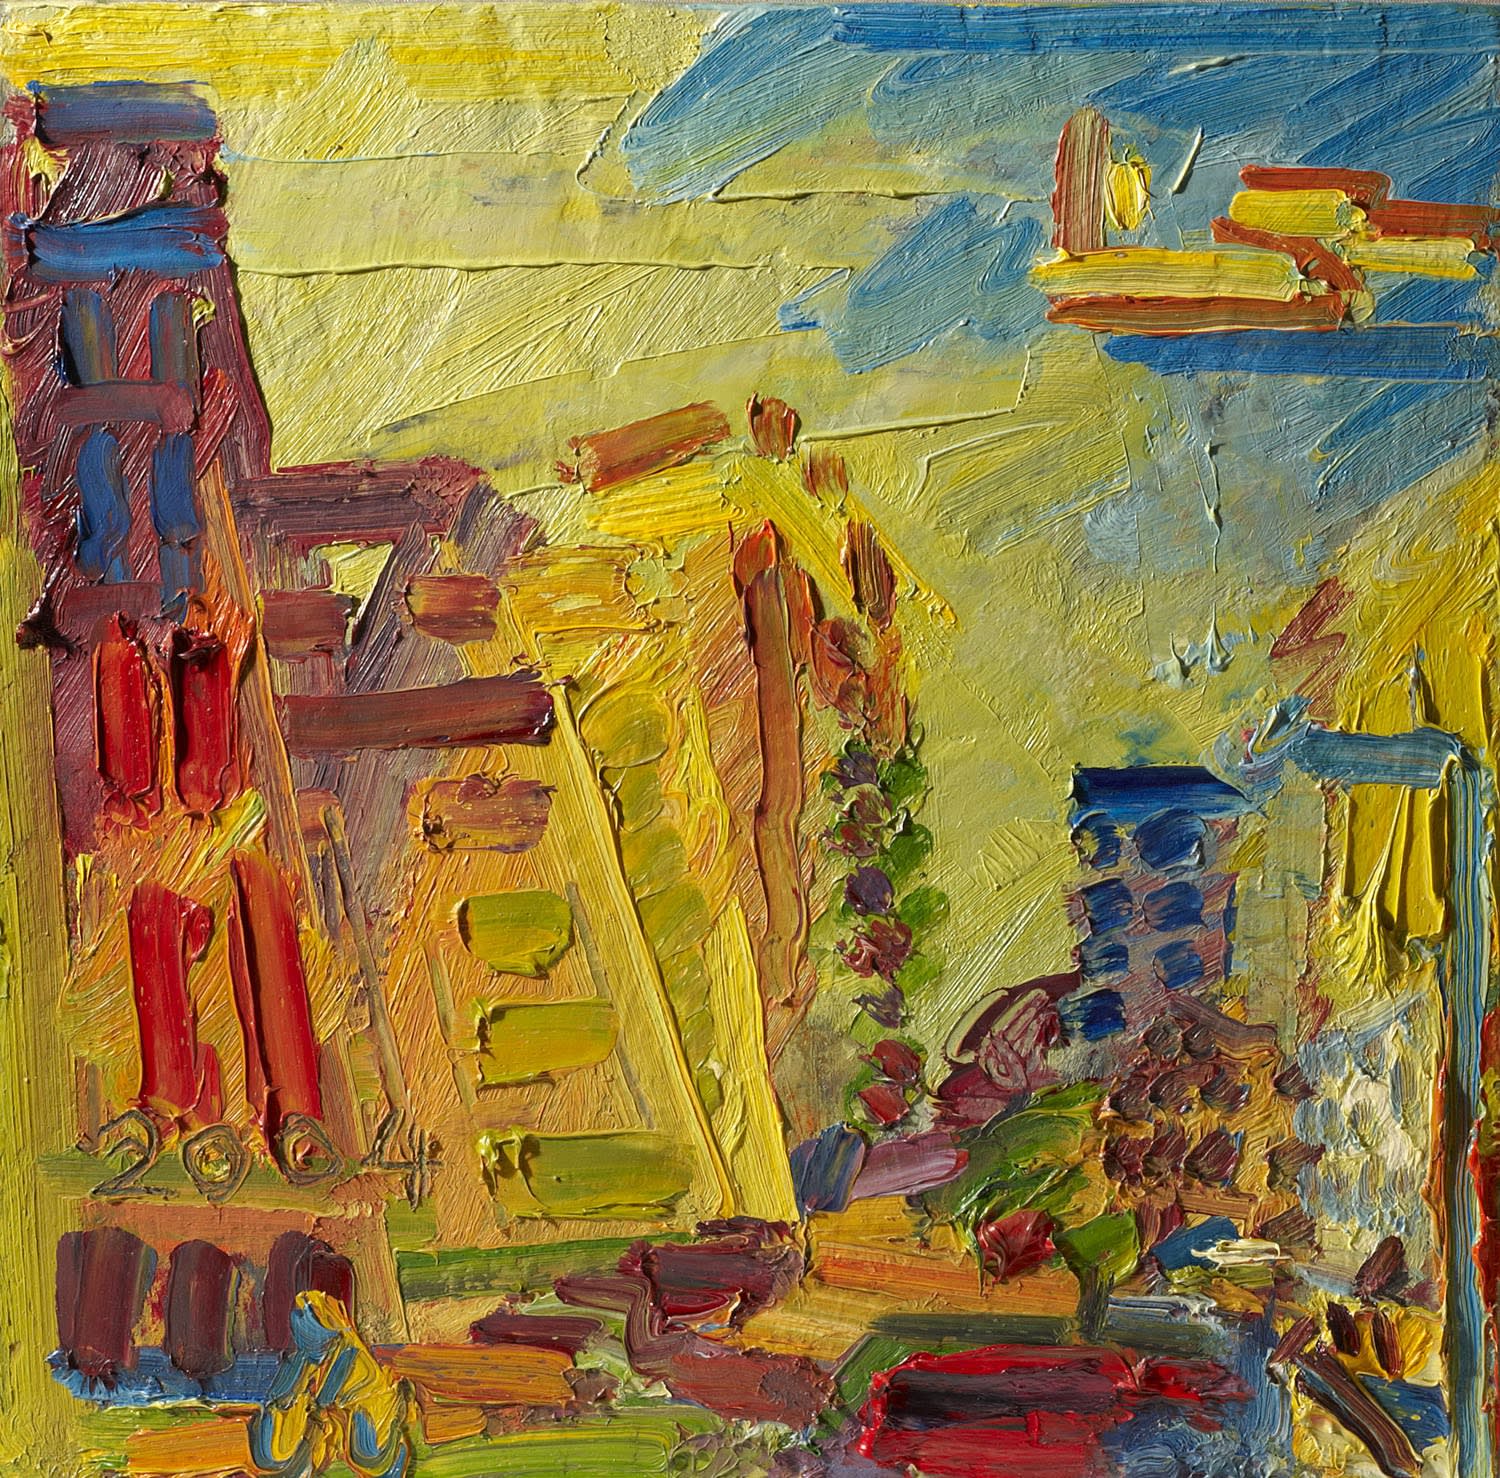 Frank Auerbach (1931-) Mornington Crescent, Summer Morning II 2004 Oil on board 51 × 51 cm Ben Uri Collection © Frank Auerbach, courtesy Marlborough Fine Art To see and discover more about this artist click here